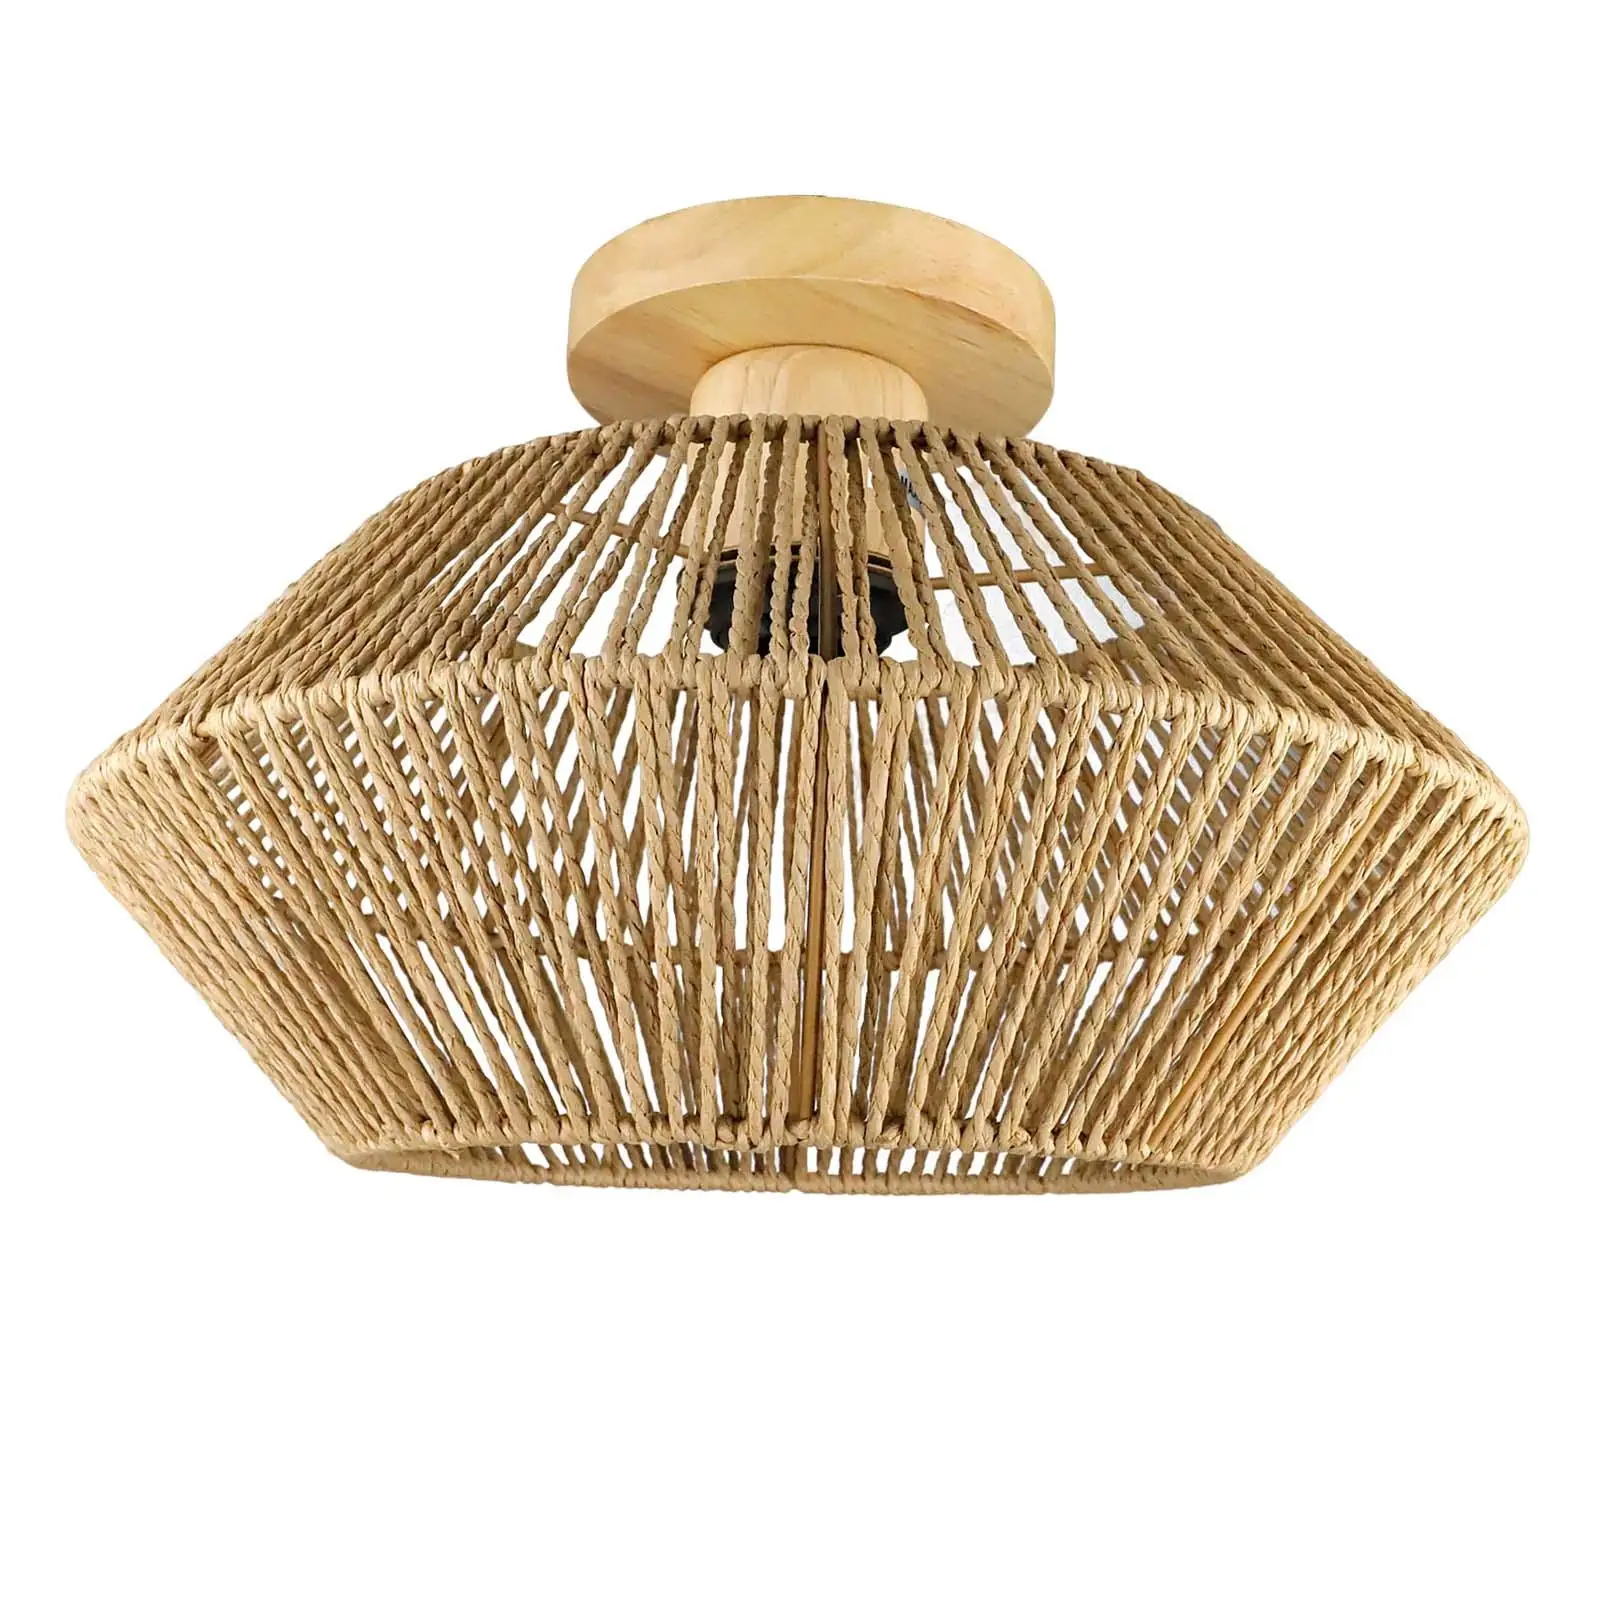 Minimalist LED Ceiling Lamp Shades Light Fixture Handmade Woven Chandelier Lampshade for Bedroom Office Laundry Restaurant